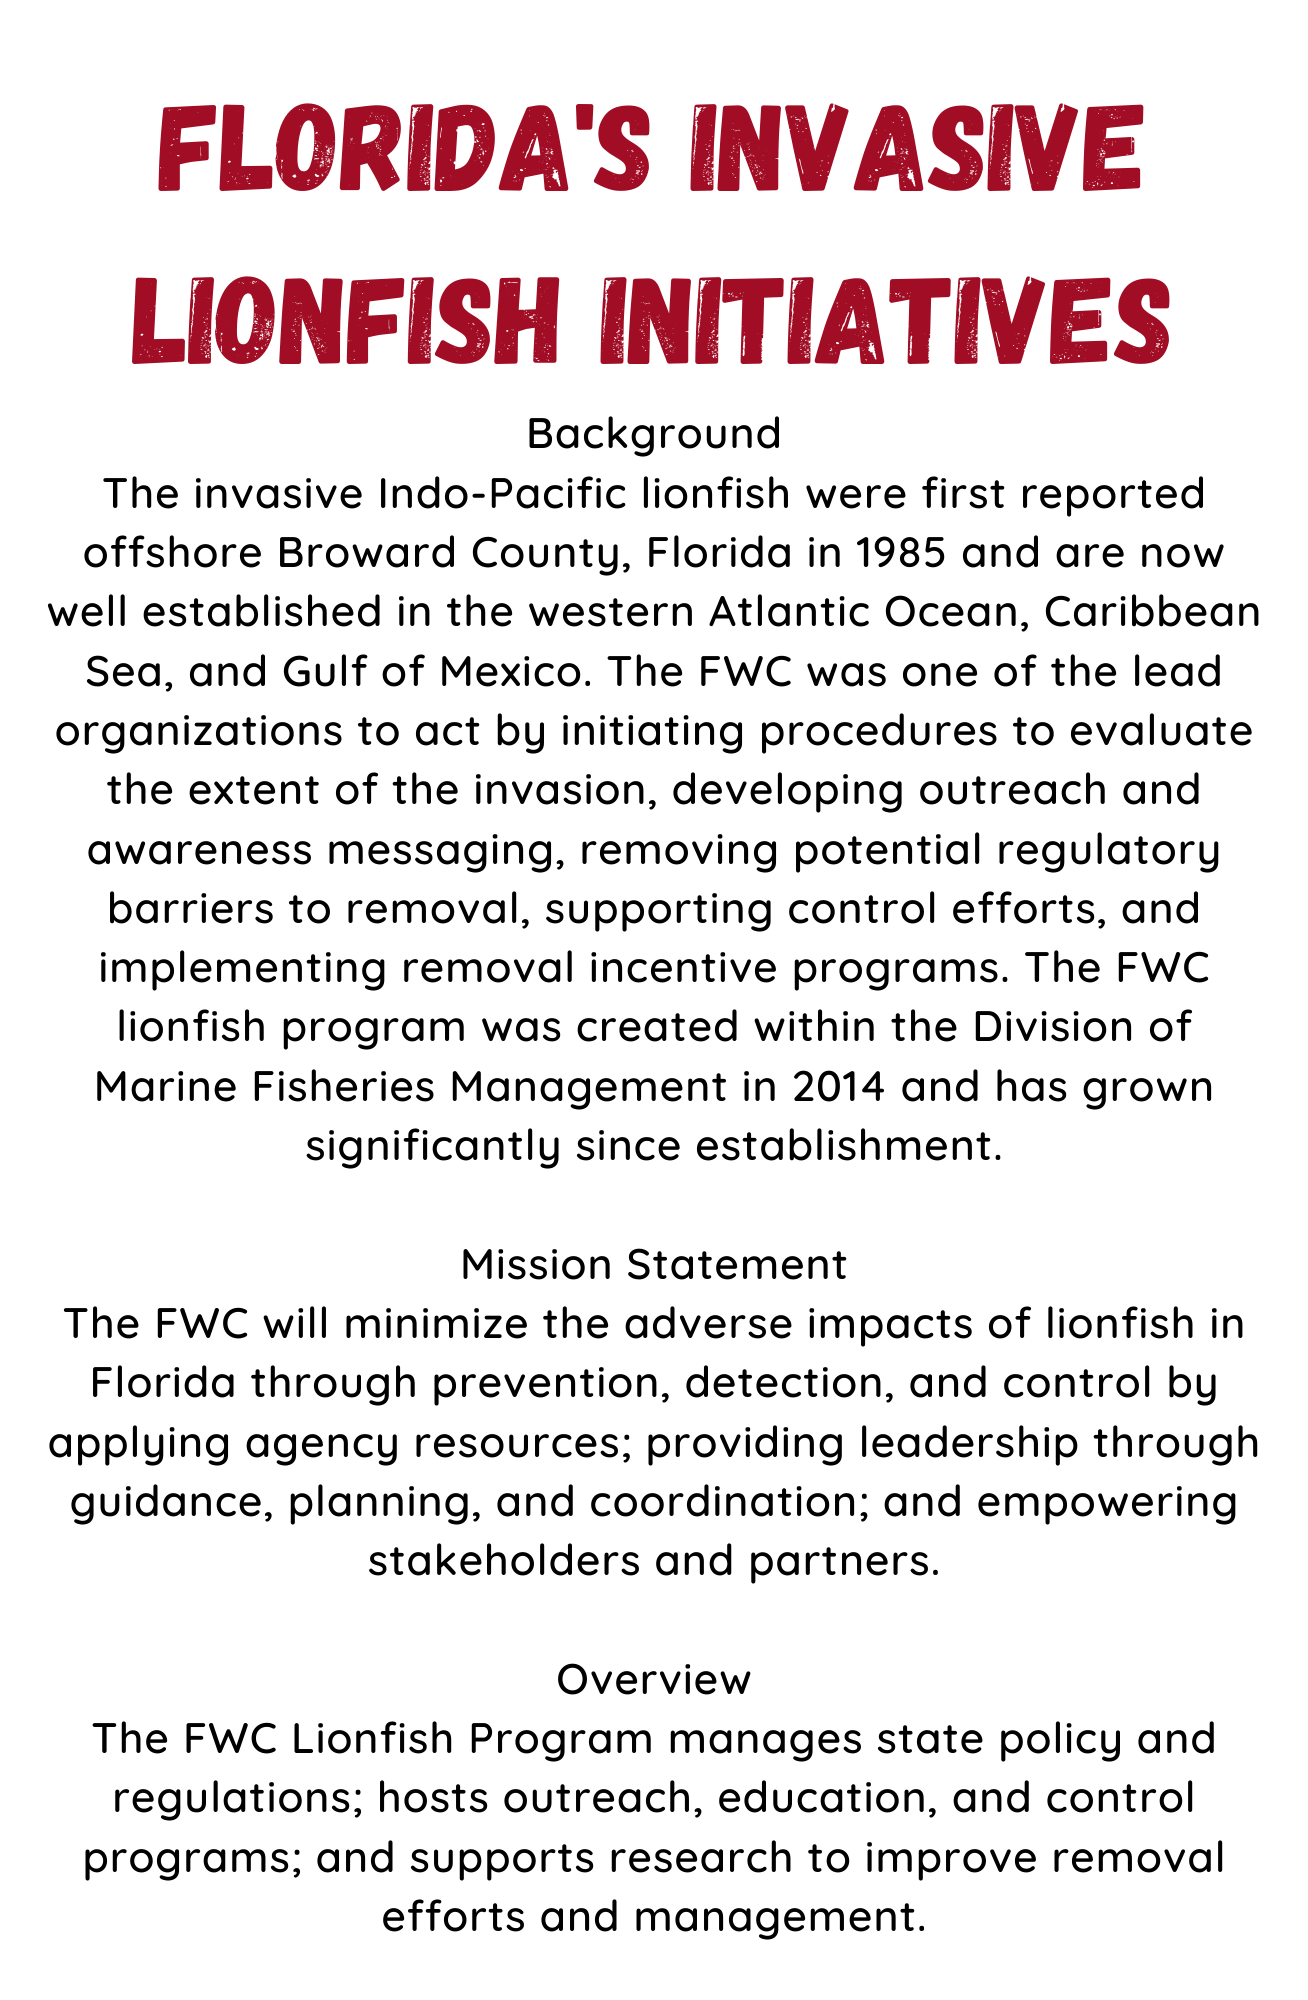 Florida's Invasive Lionfish Initiatives. Background The invasive Indo-Pacific lionfish were first reported offshore Broward County, Florida in 1985 and are now well established in the western Atlantic Ocean, Caribbean Sea, and Gulf of Mexico. The FWC was one of the lead organizations to act by initiating procedures to evaluate the extent of the invasion, developing outreach and awareness messaging, removing potential regulatory barriers to removal, supporting control efforts, and implementing removal incentive programs. The FWC lionfish program was created within the Division of Marine Fisheries Management in 2014 and has grown significantly since establishment. Mission Statement The FWC will minimize the adverse impacts of lionfish in Florida through prevention, detection, and control by applying agency resources; providing leadership through guidance, planning, and coordination; and empowering stakeholders and partners. Overview The FWC Lionfish Program manages state policy and regulations; hosts outreach, education, and control programs; and supports research to improve removal efforts and management.